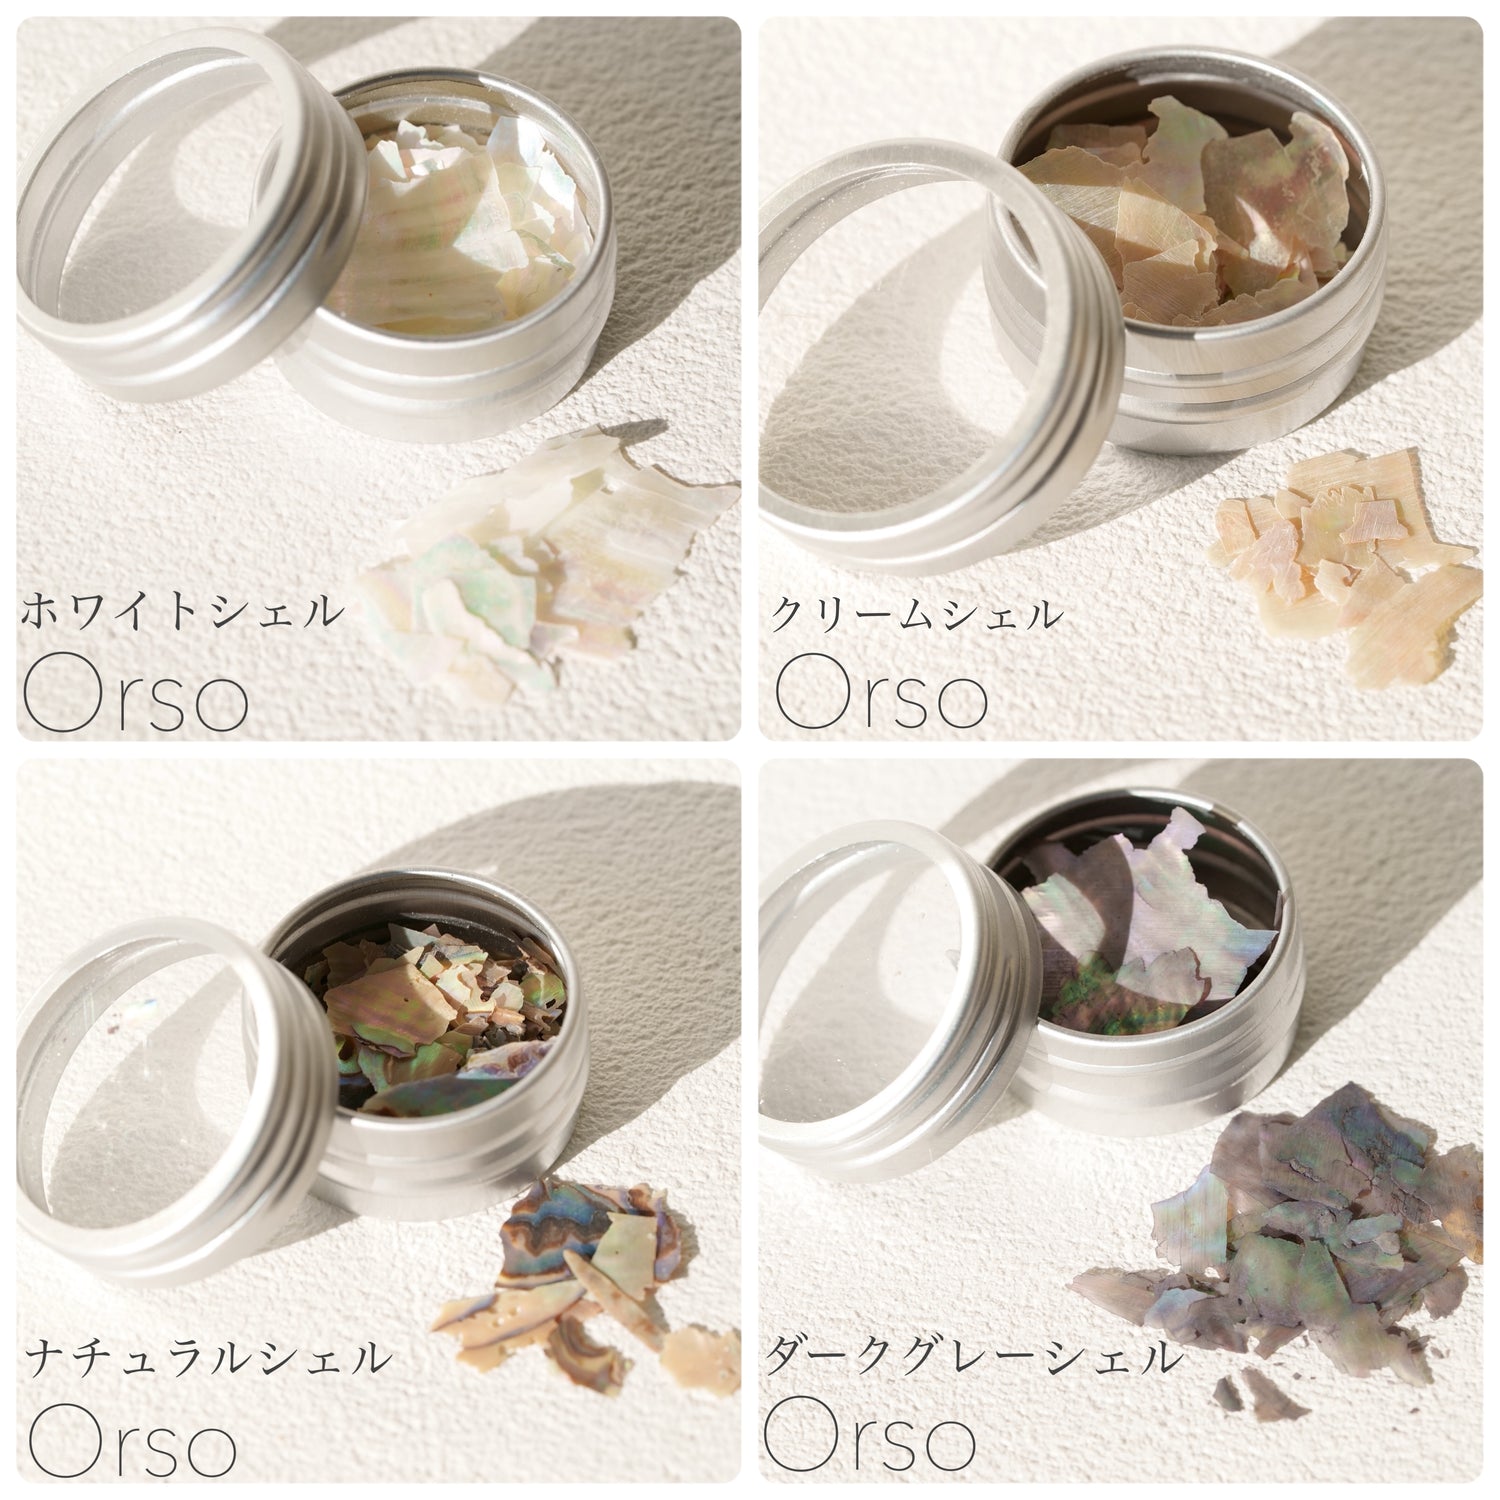 Orso NAIL STORE シェル4種セット 15セット